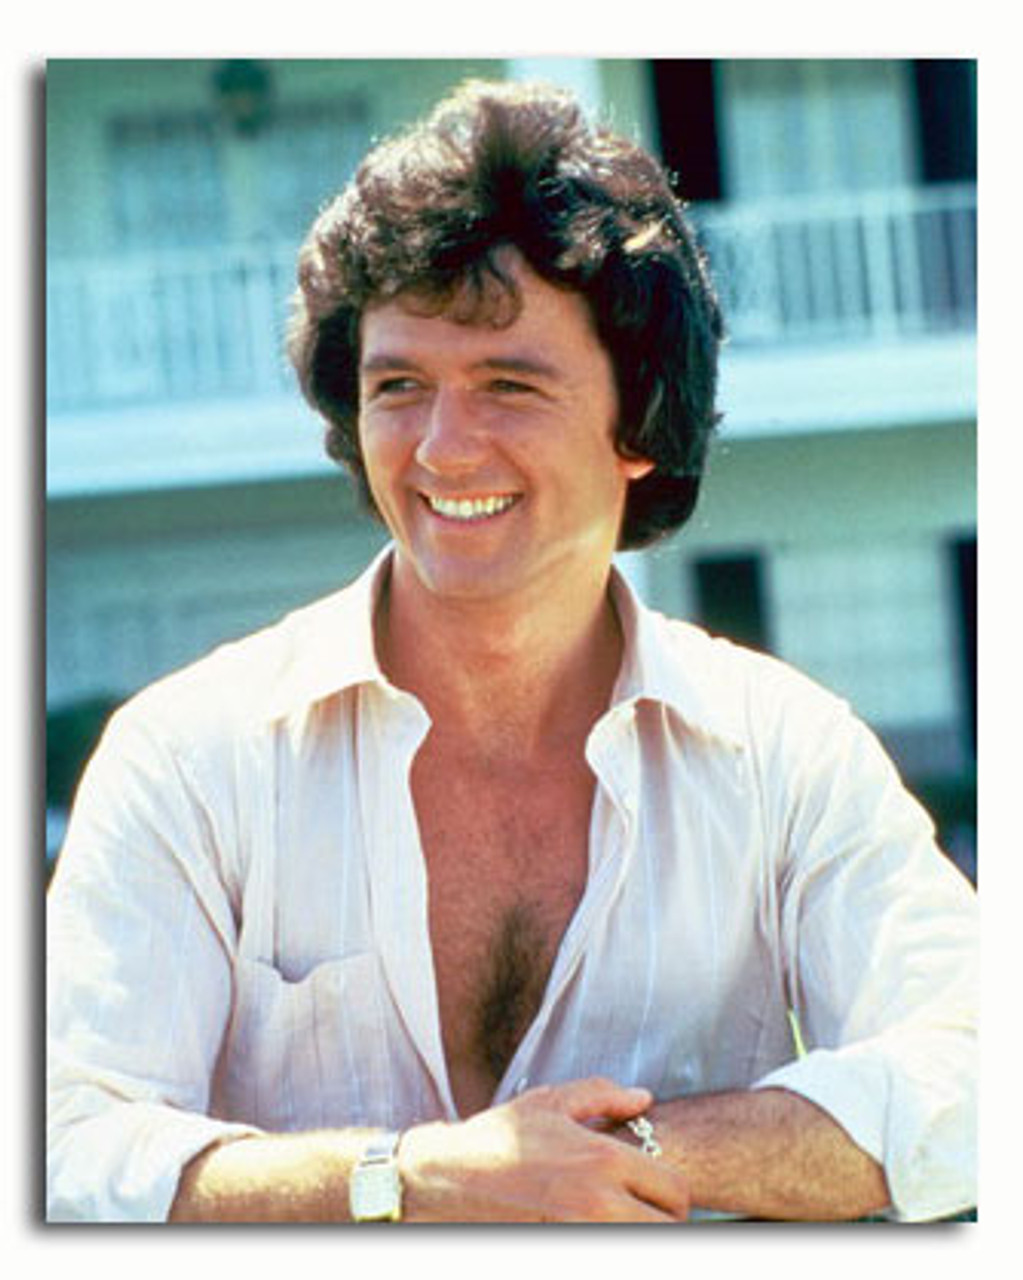 SS2866994) Movie of Patrick Duffy buy photos and posters at Starstills.com